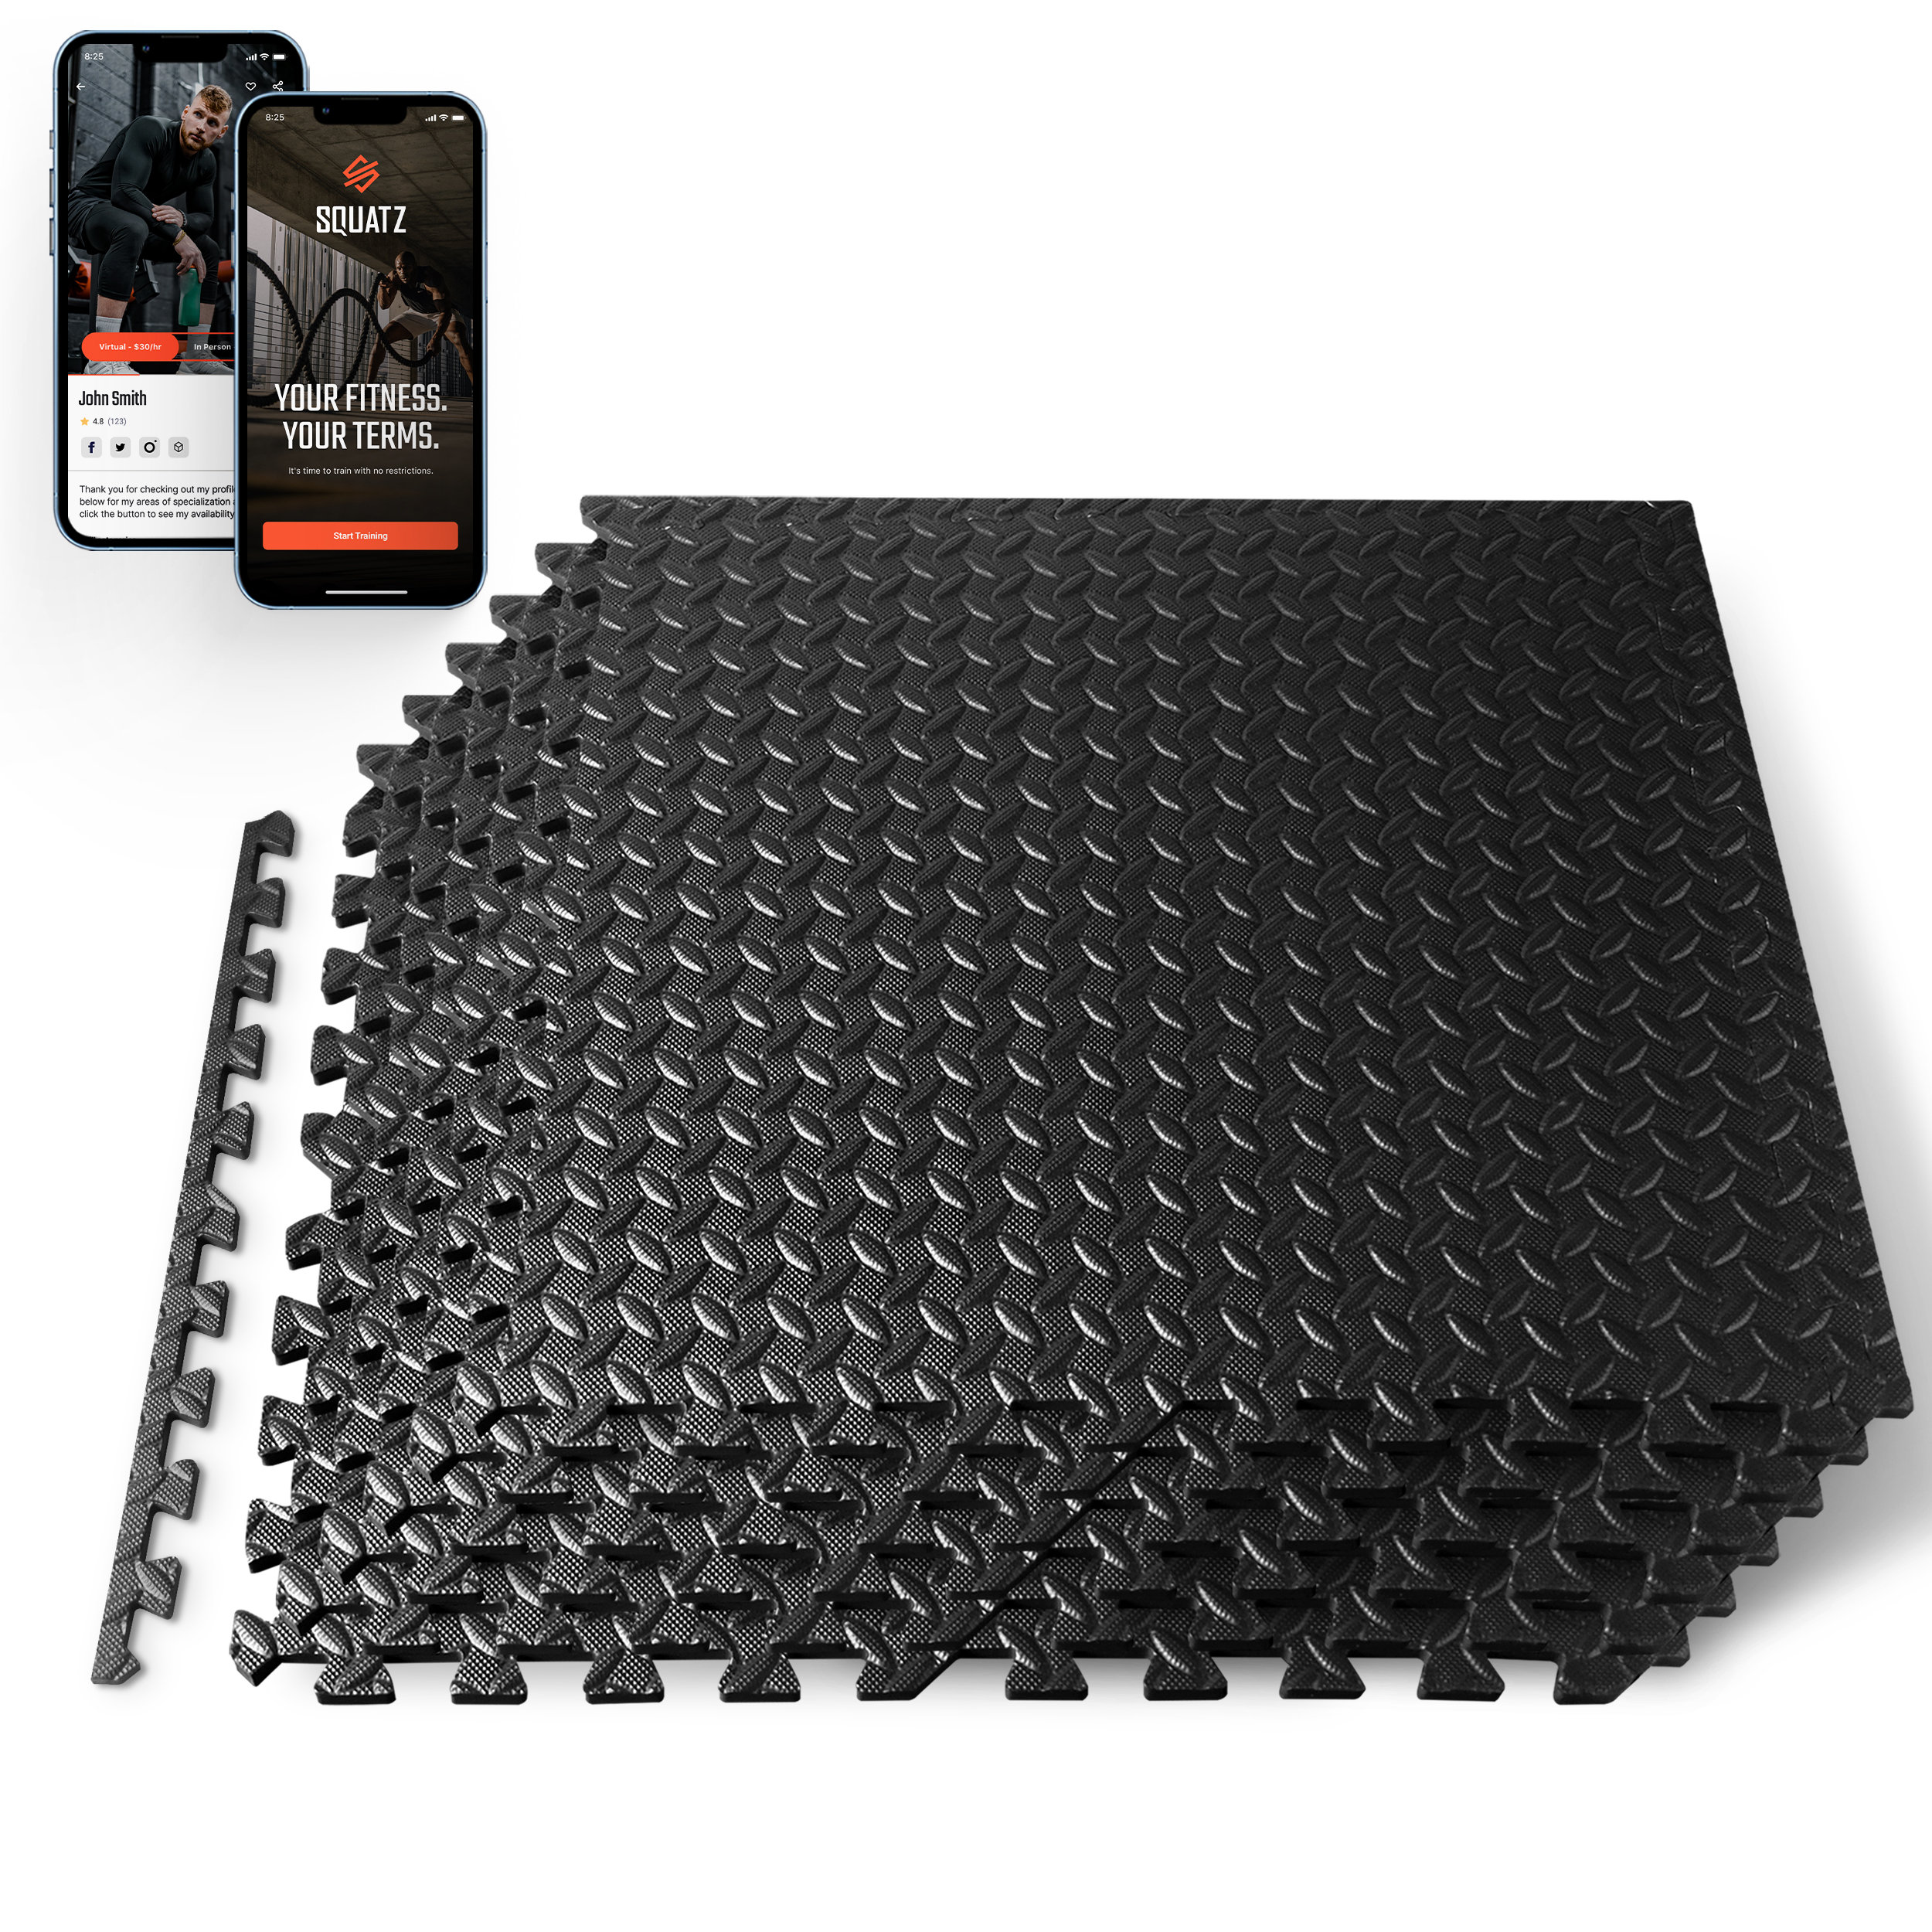 1/2in Thick 48 Sq Ft Rubber Top High Density EVA Foam Exercise Gym Mats  Non-slip 12 Pcs - Interlocking Puzzle Floor Tiles for Home Gym Heavy  Workout